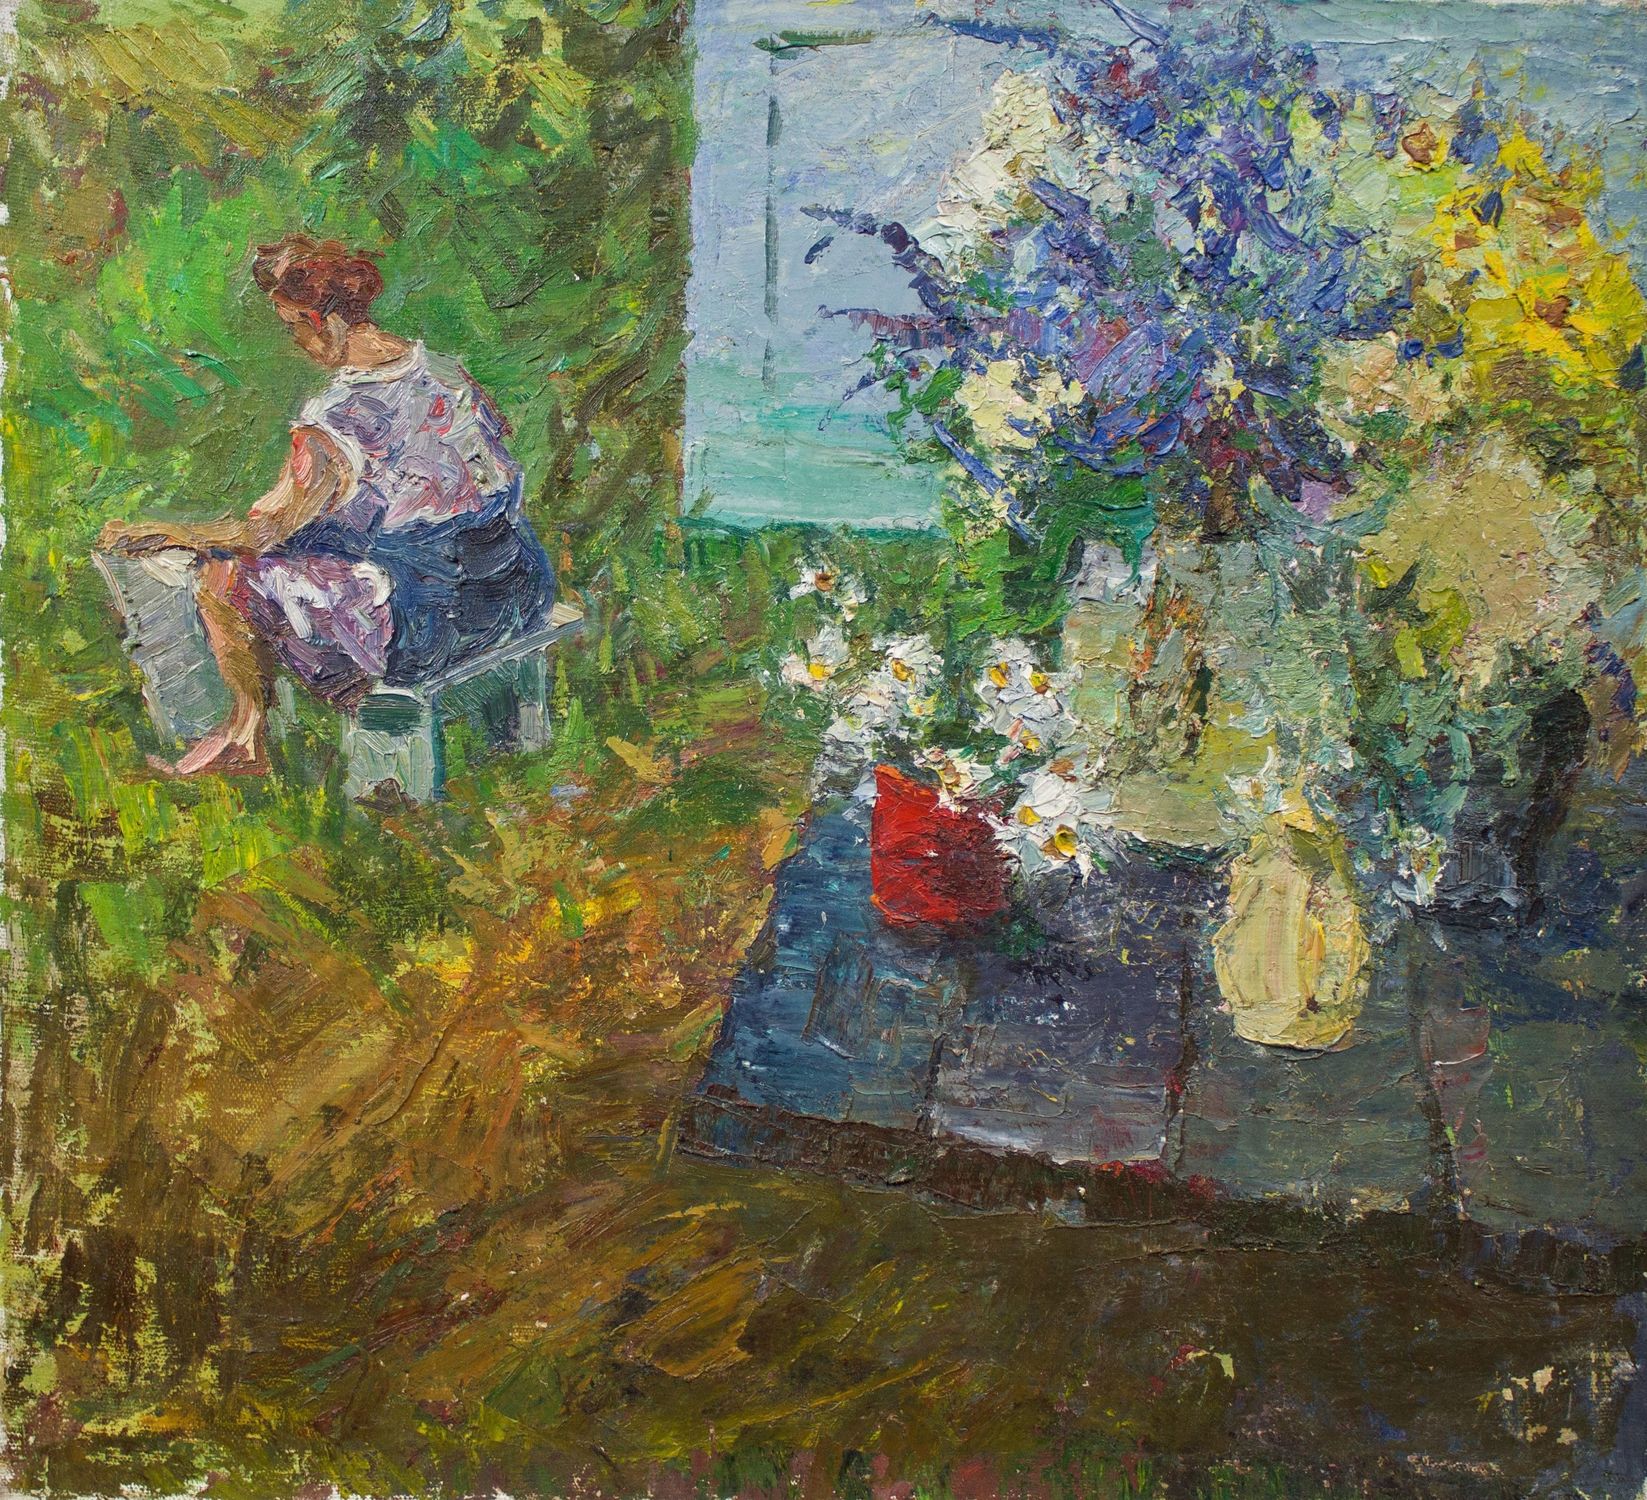 "On the porch"